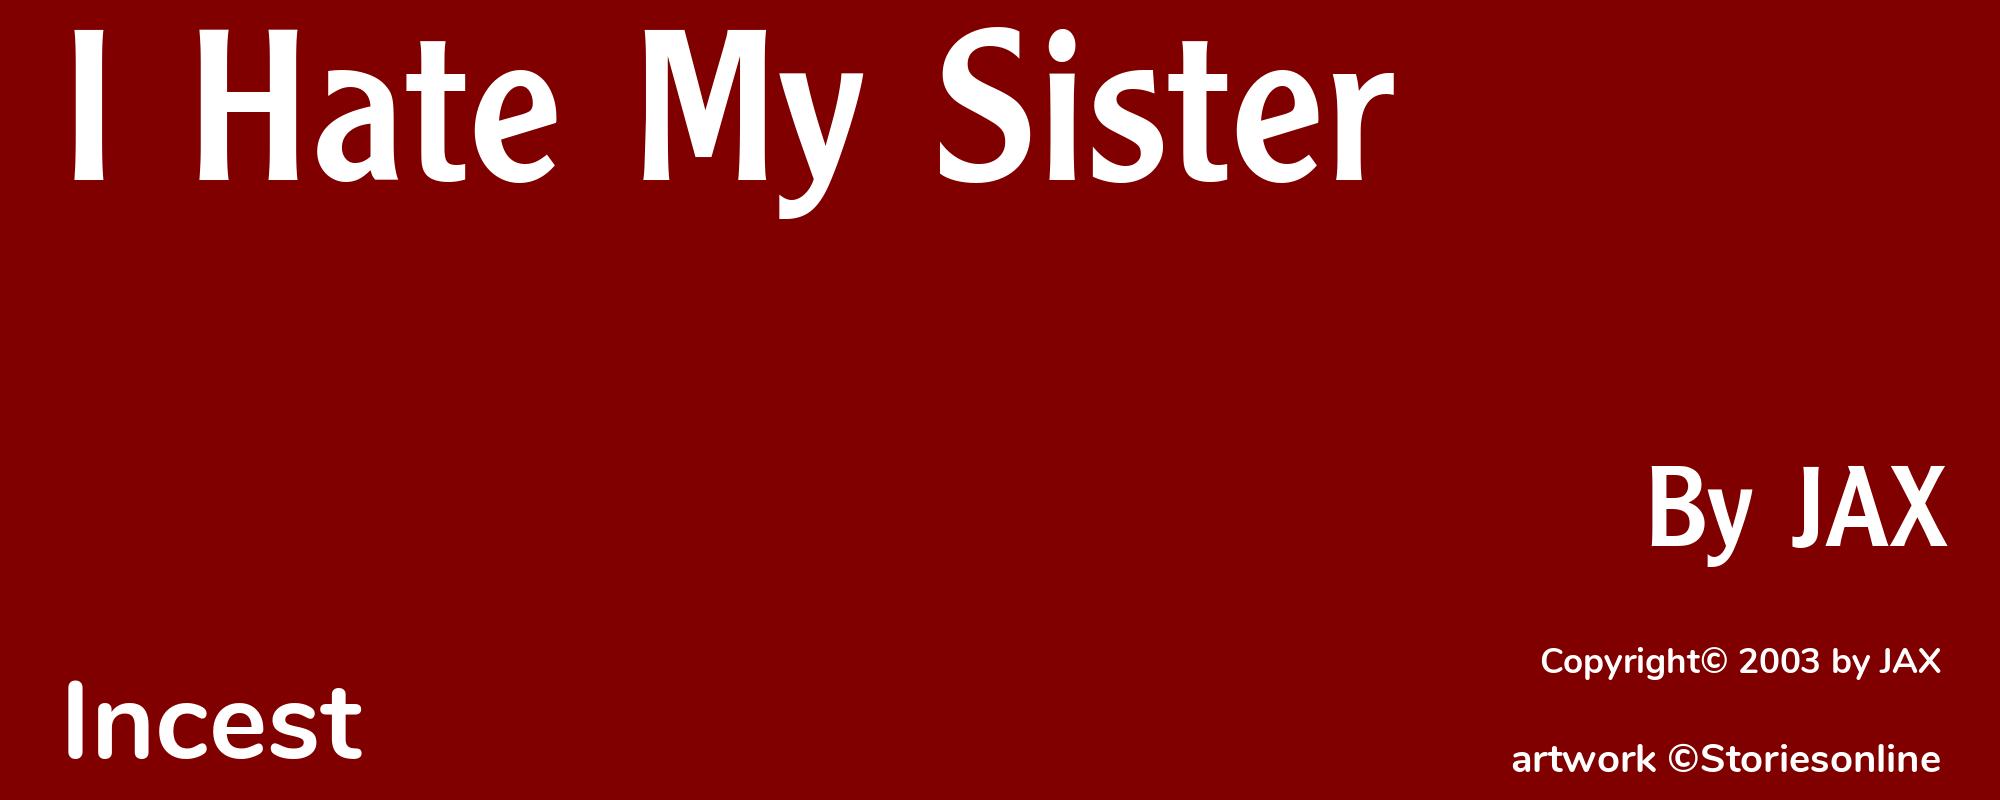 I Hate My Sister - Cover